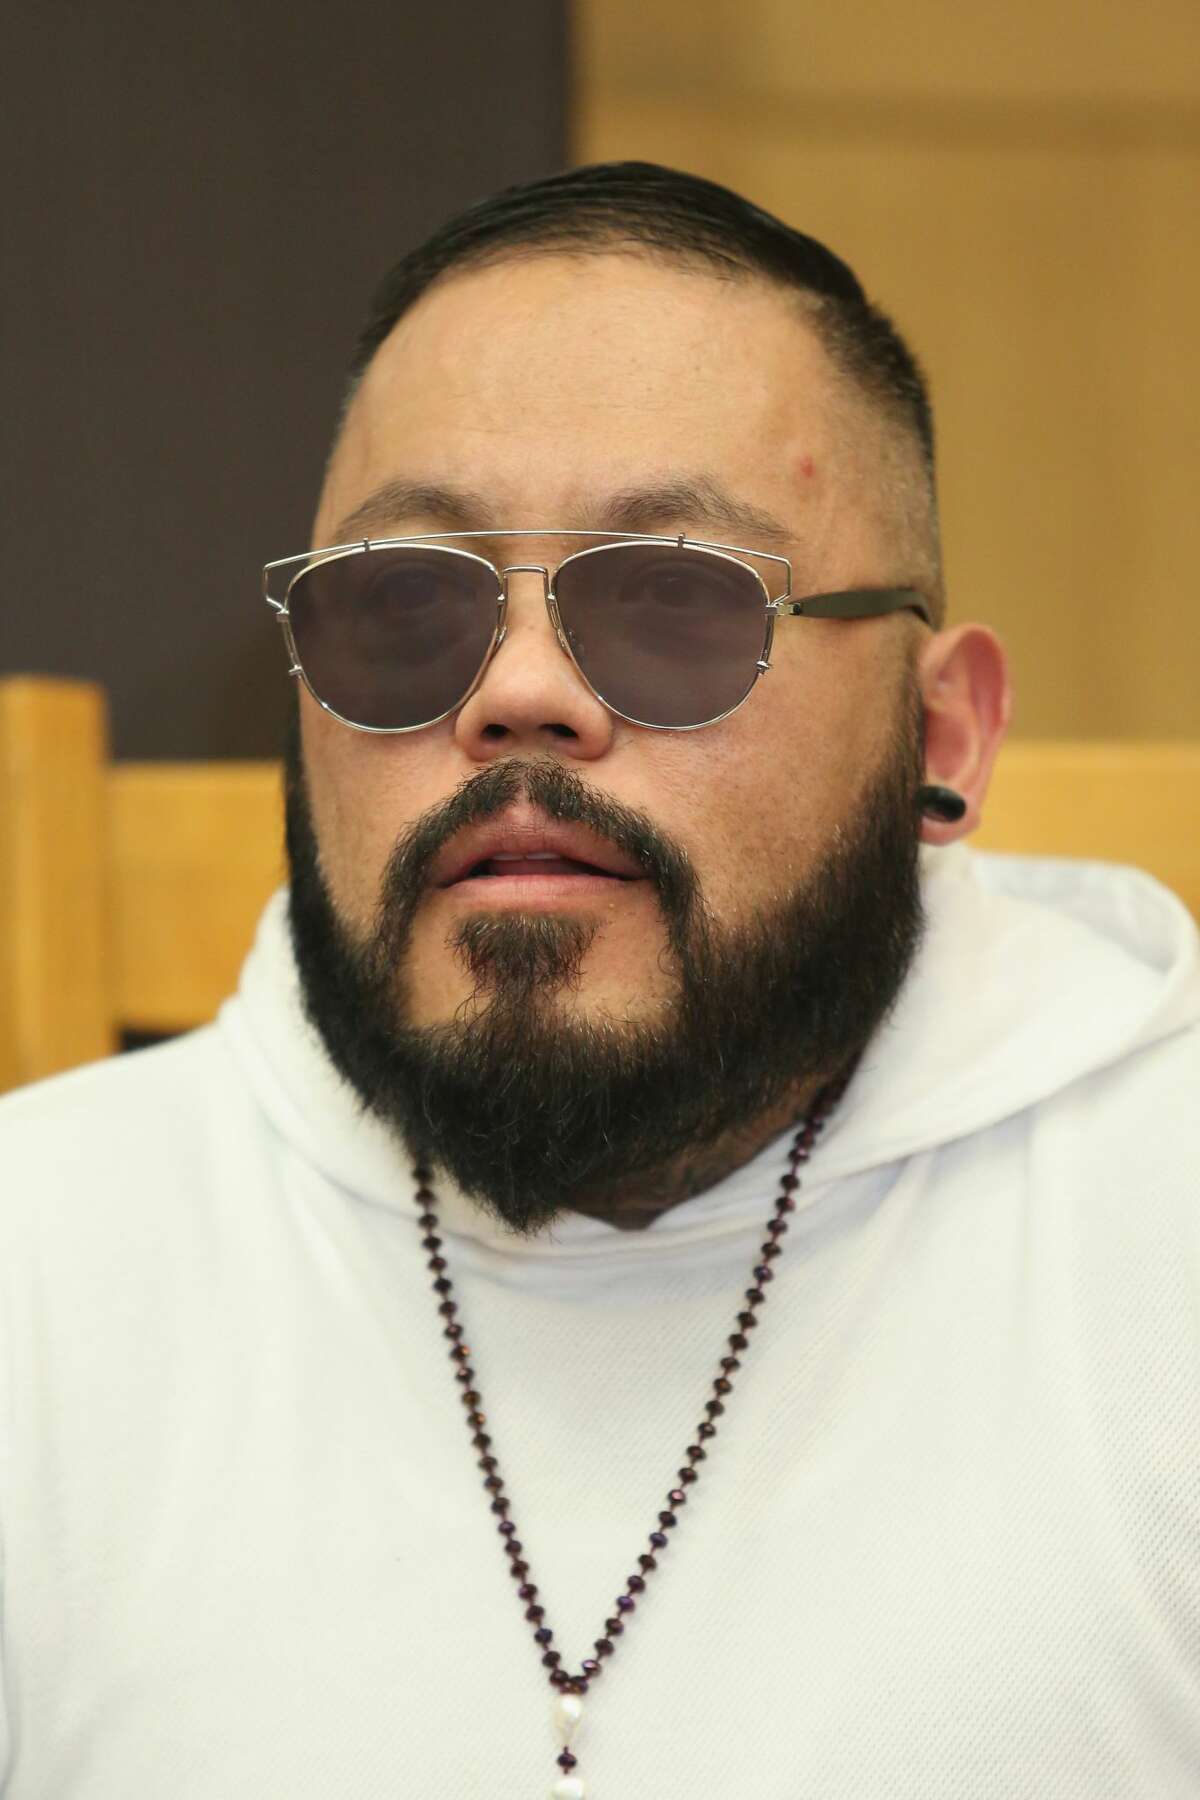 MEXICO CITY, MEXICO - MAY 19: A.B. Quintanilla of Kumbia All Starz attends a press conference to promote their new tour at Hotel Camino Real on May 19, 2015 in Mexico City, Mexico. (Photo by Victor Chavez/WireImage)